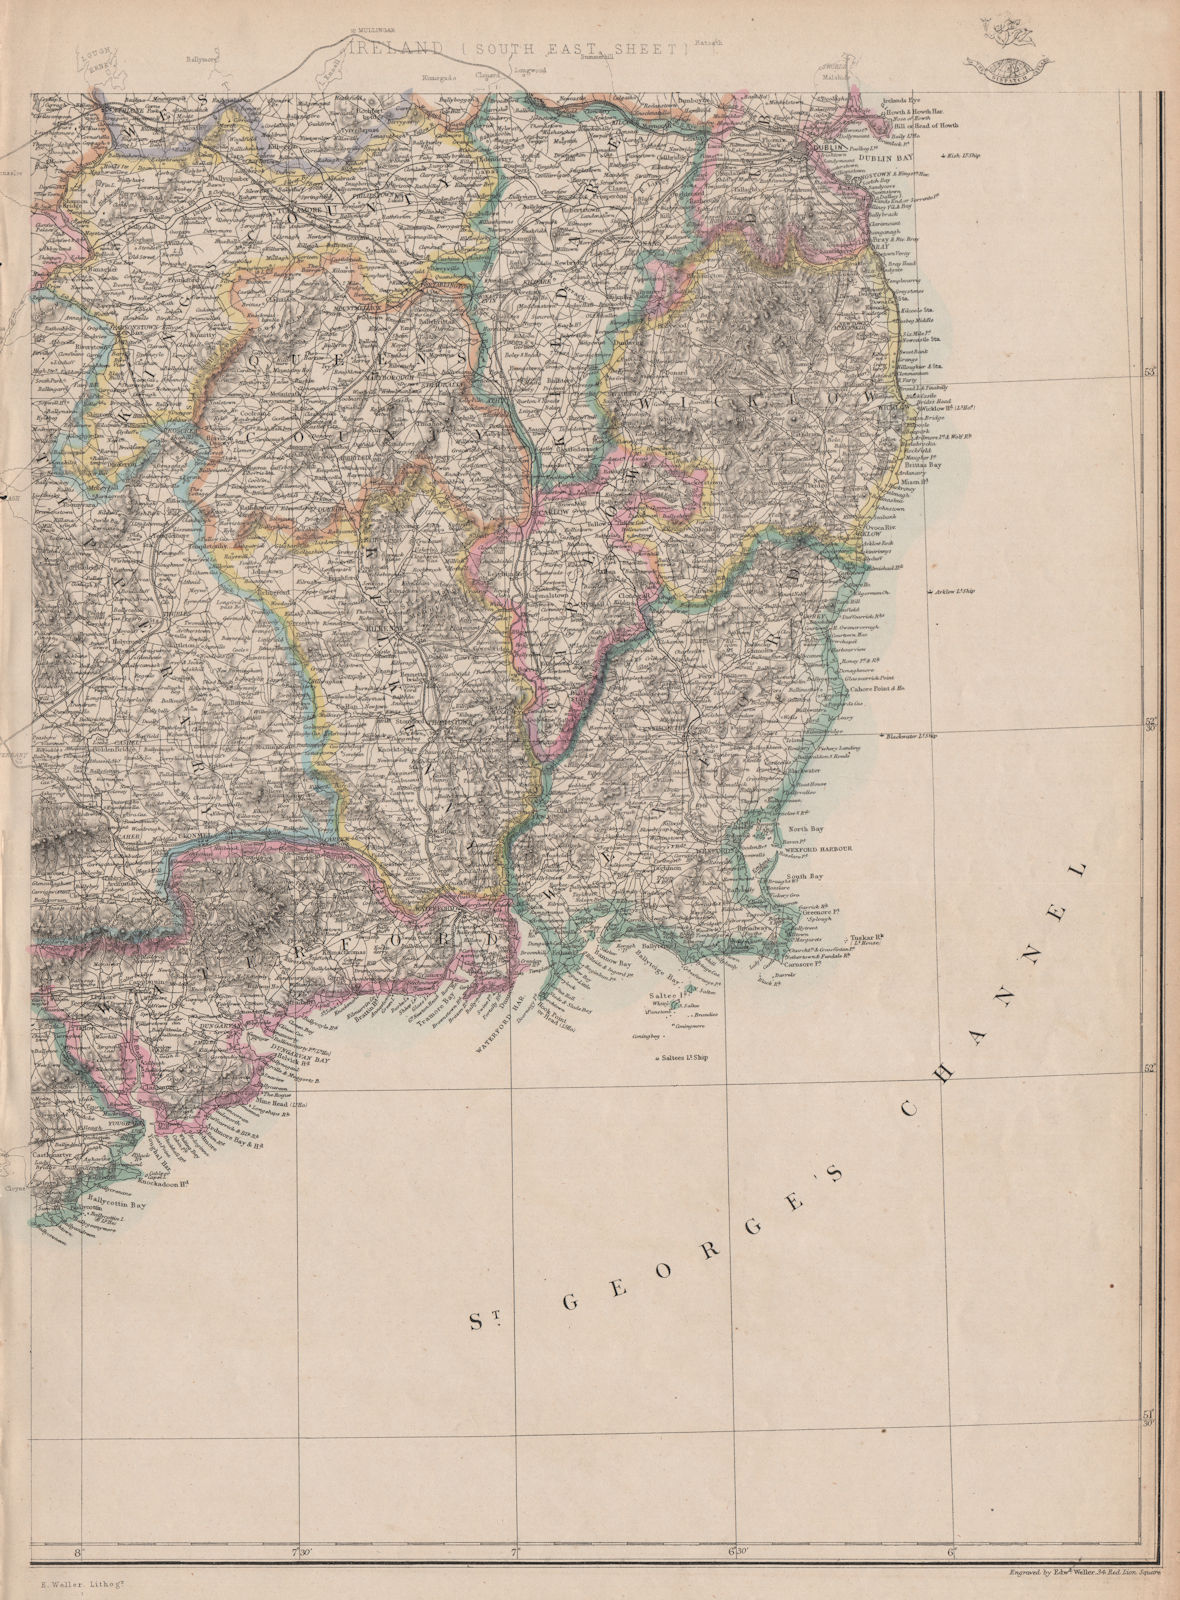 Associate Product IRELAND SOUTH EAST. Wexford Waterford Kilkenny Wicklow Kildare. WELLER 1863 map